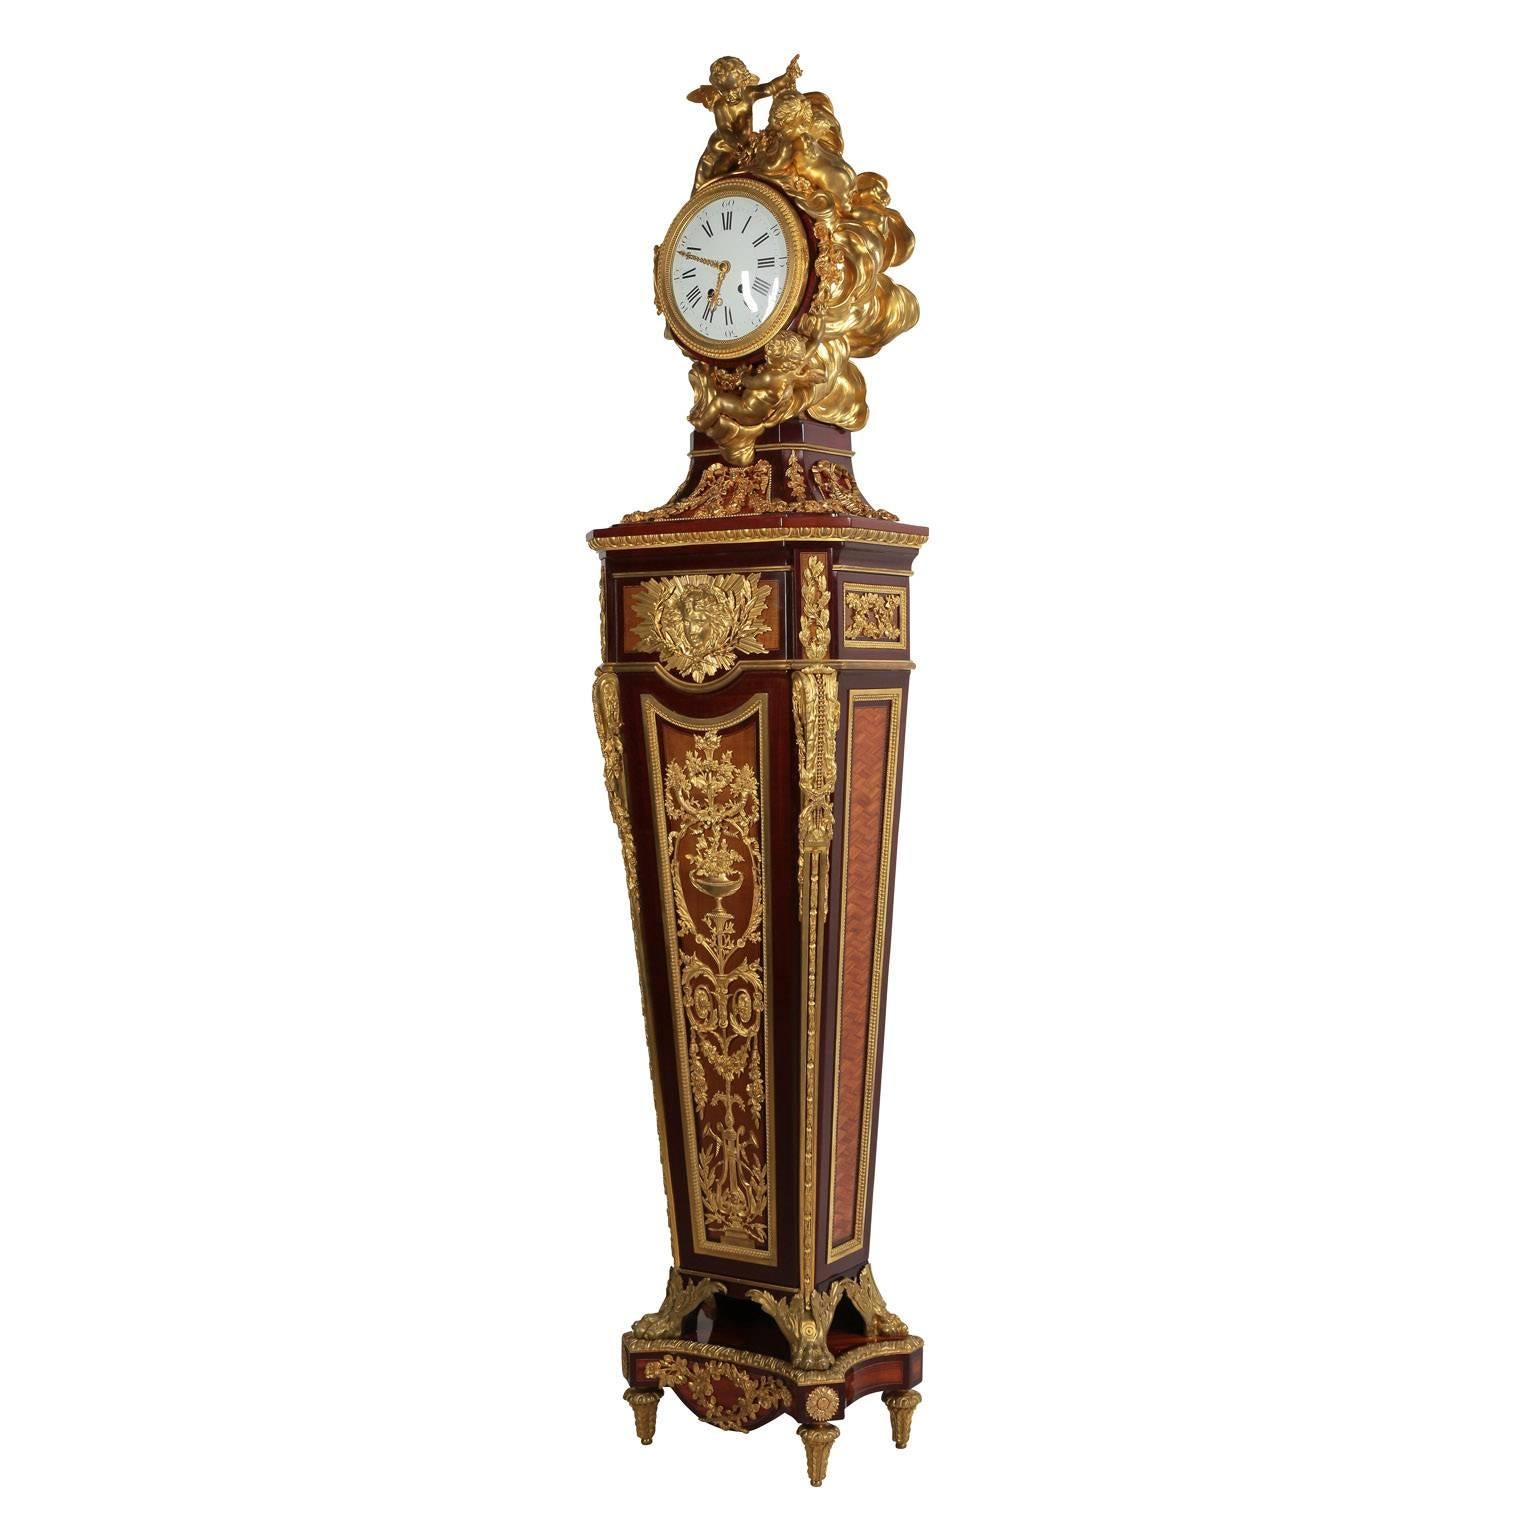 French 19th C. Louis XVI Style Cherub Tall-Case Clock After Jean-Henri Riesener For Sale 1